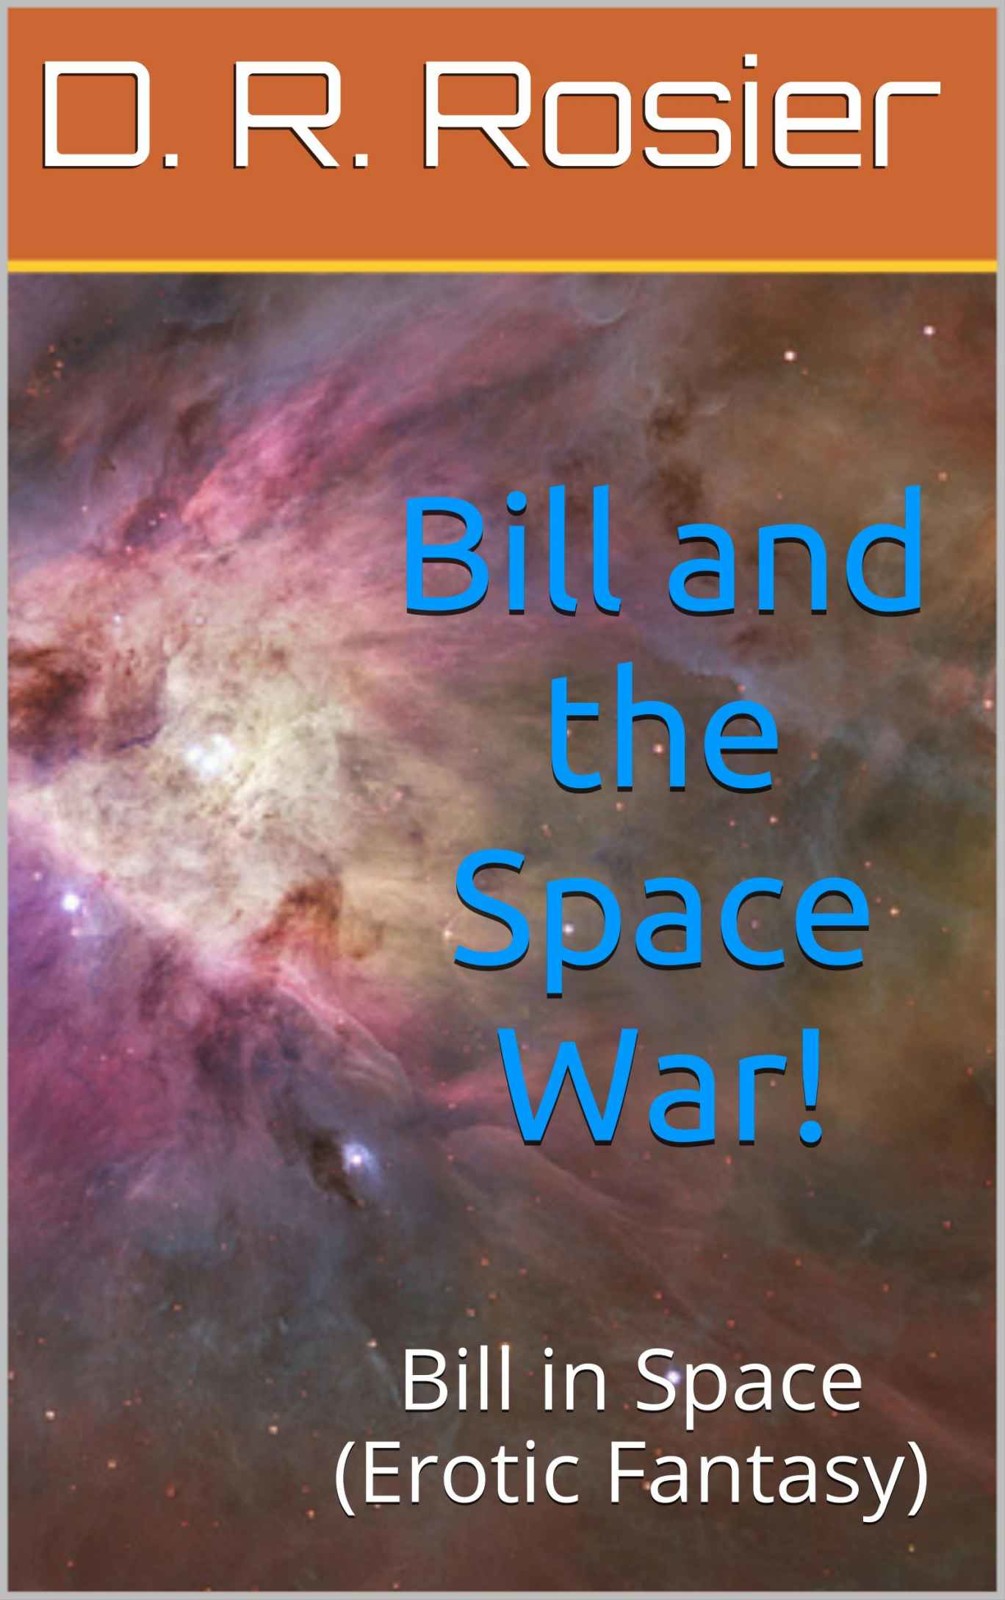 Bill and the Space War!